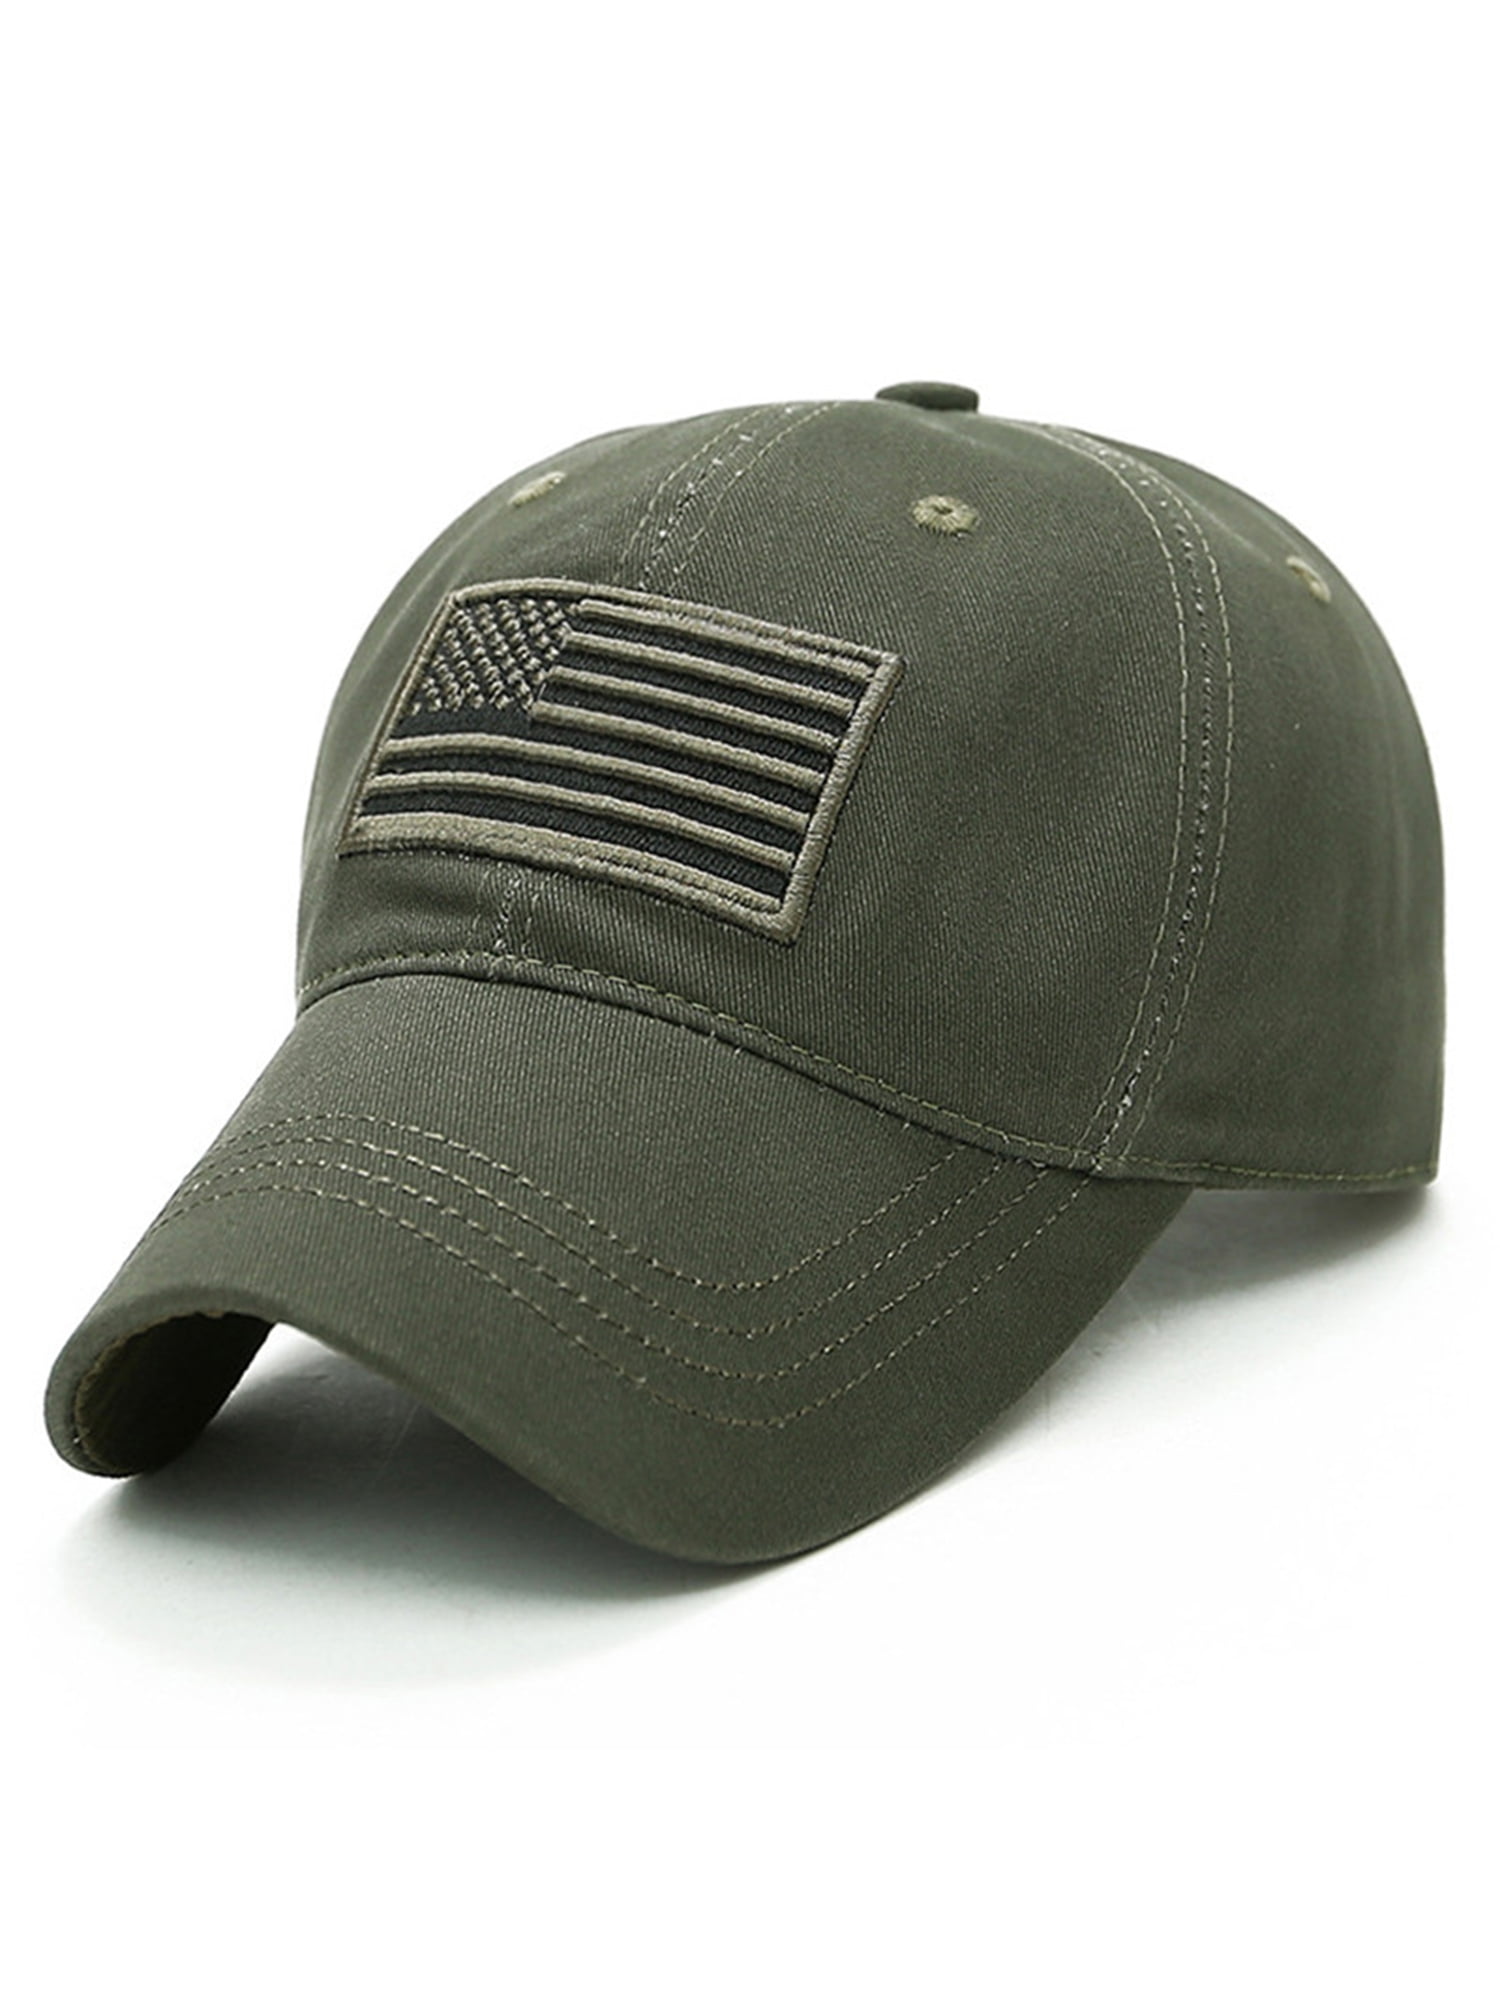 hat Available 7 Colors Drone Pilot Embroidered Low Profile Ball Cap 